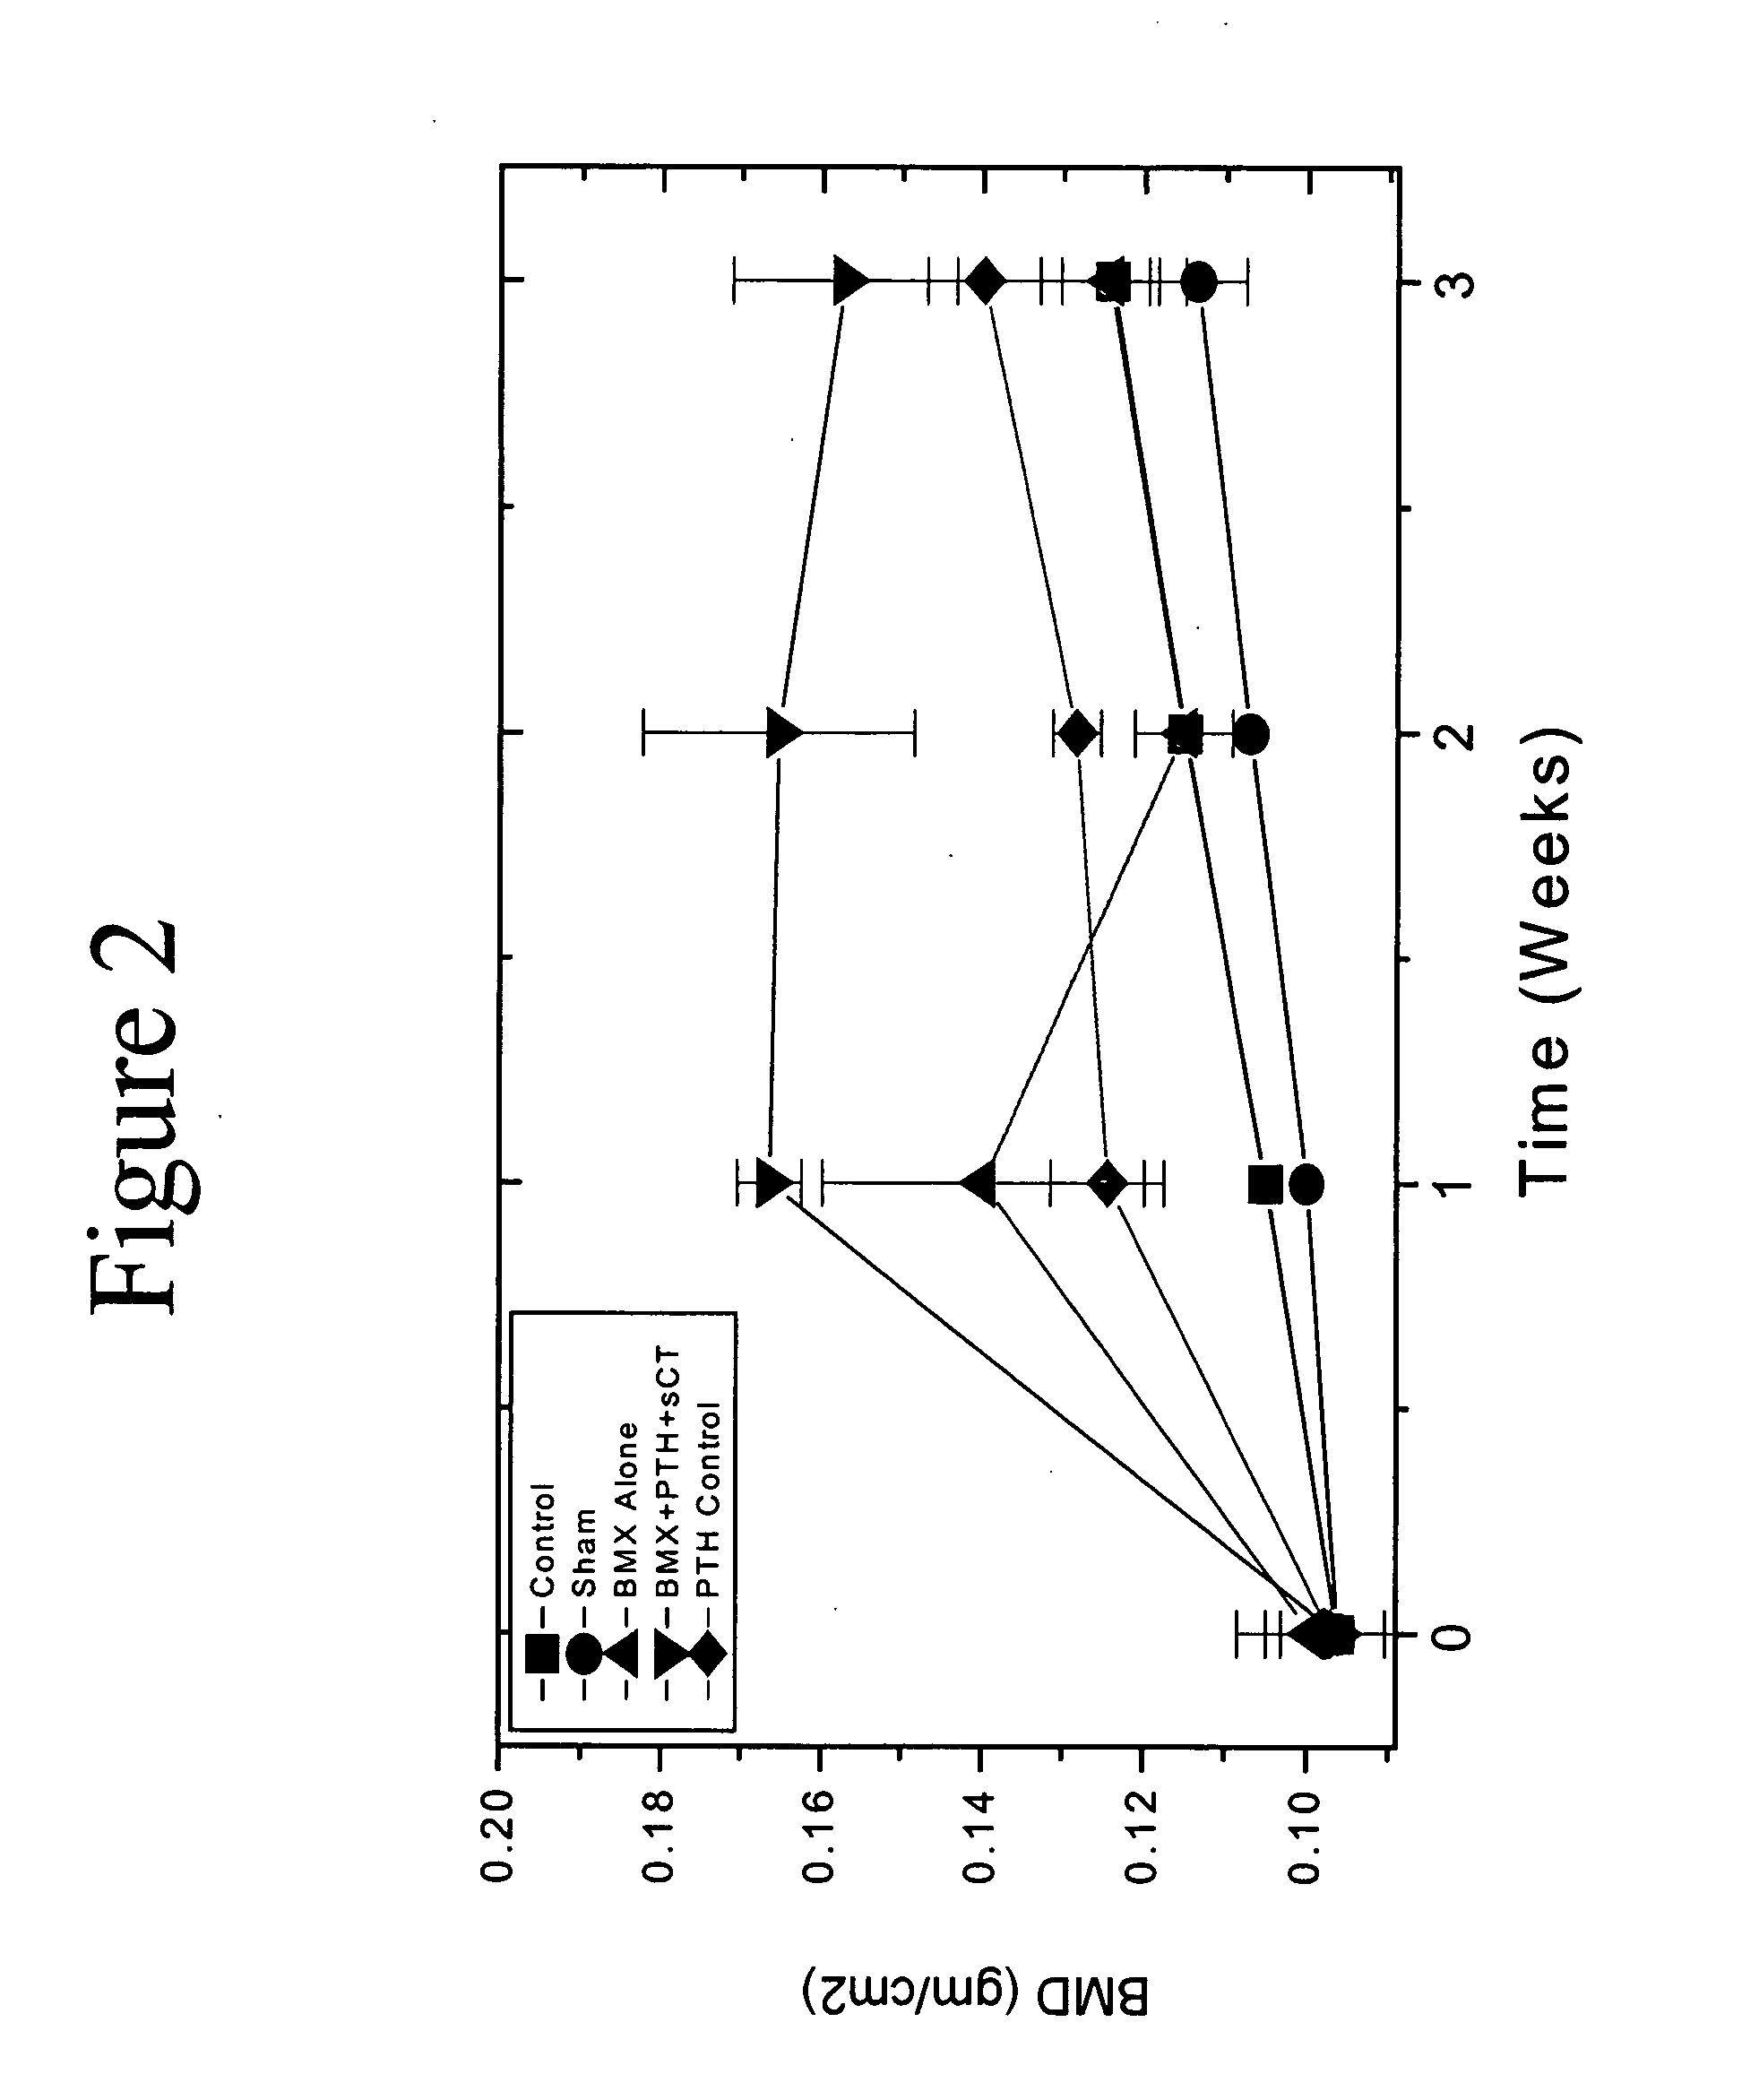 Method for fostering bone formation and preservation